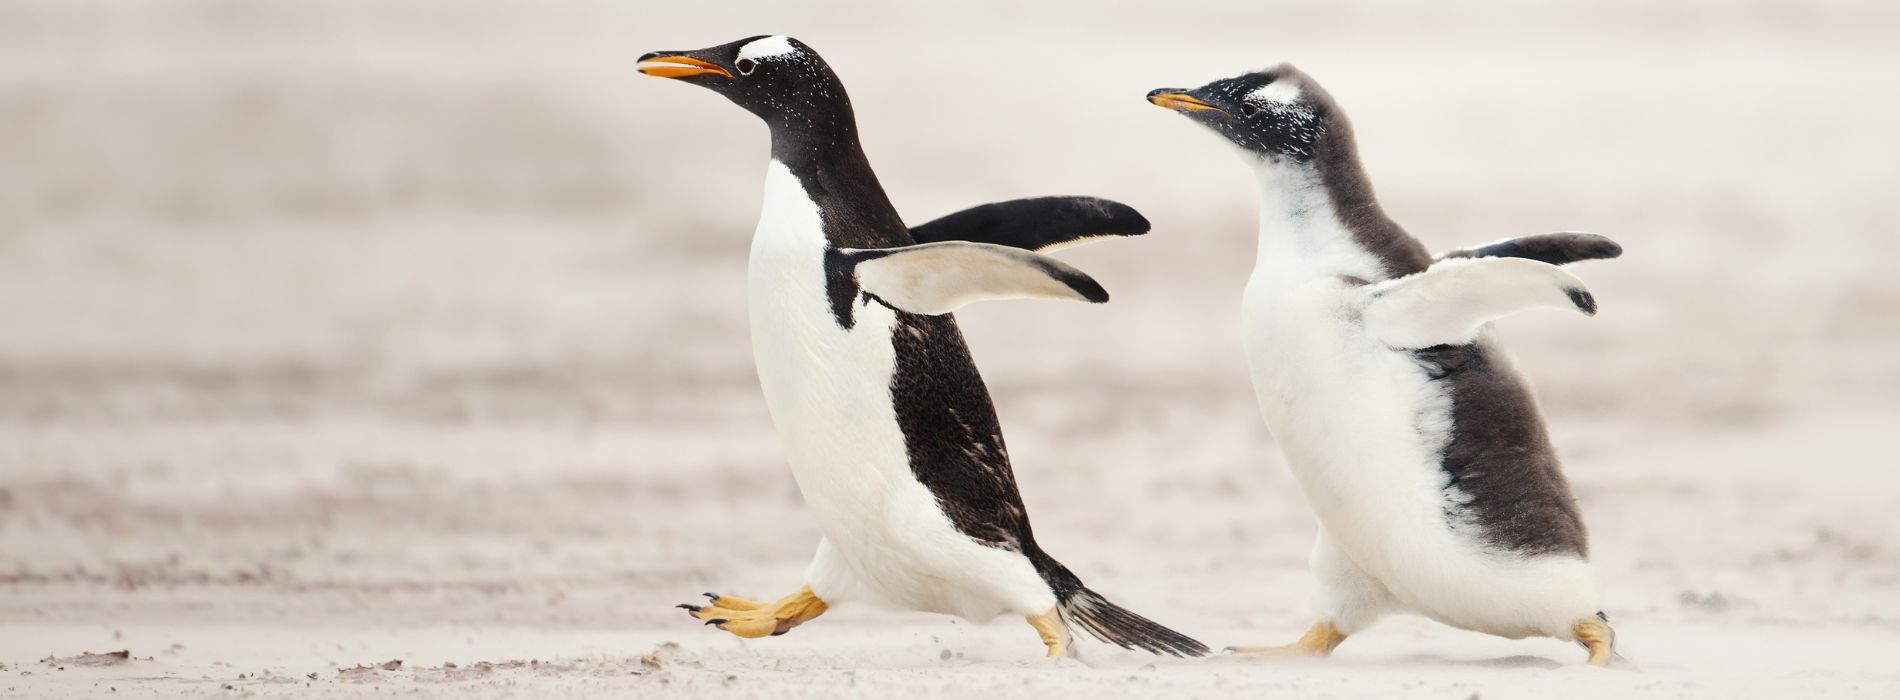 How fast can a penguin run?